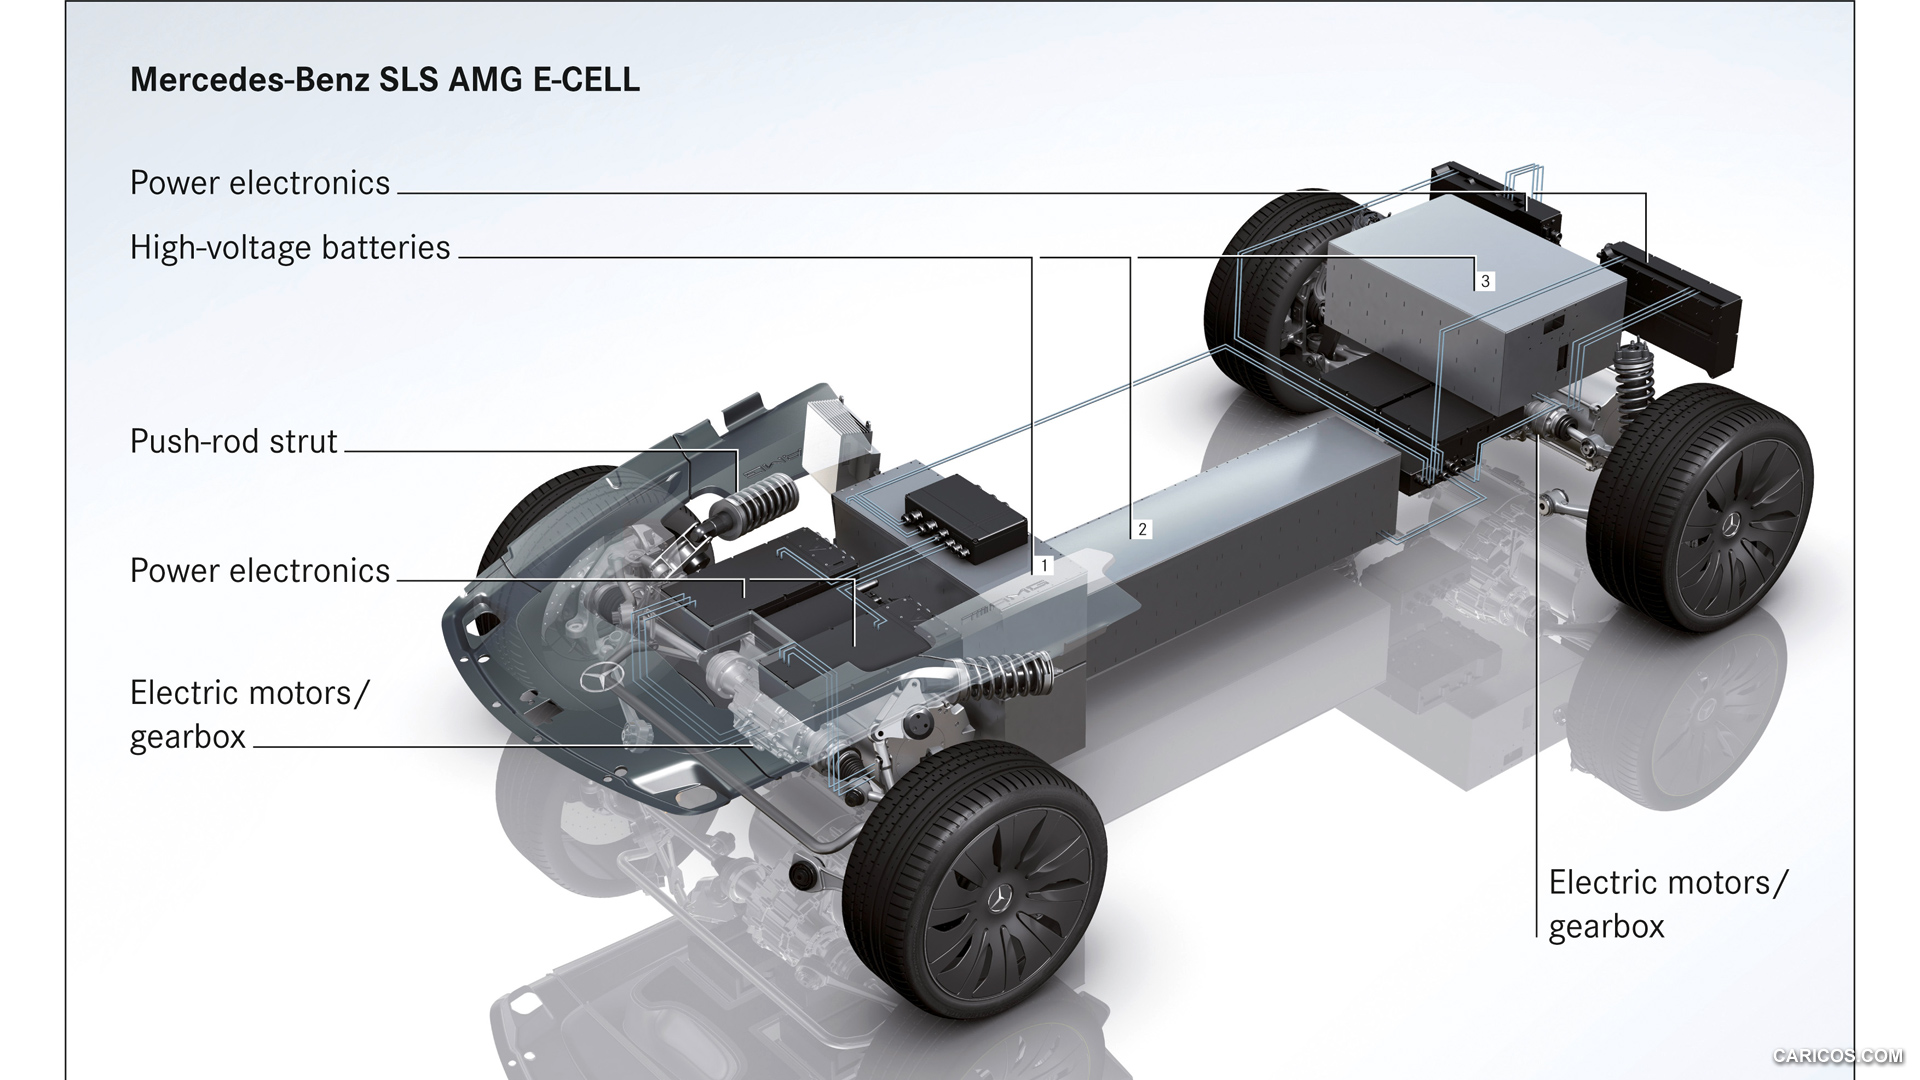 Mercedes-Benz SLS AMG E-CELL Concept  - Technical Drawing, #58 of 60